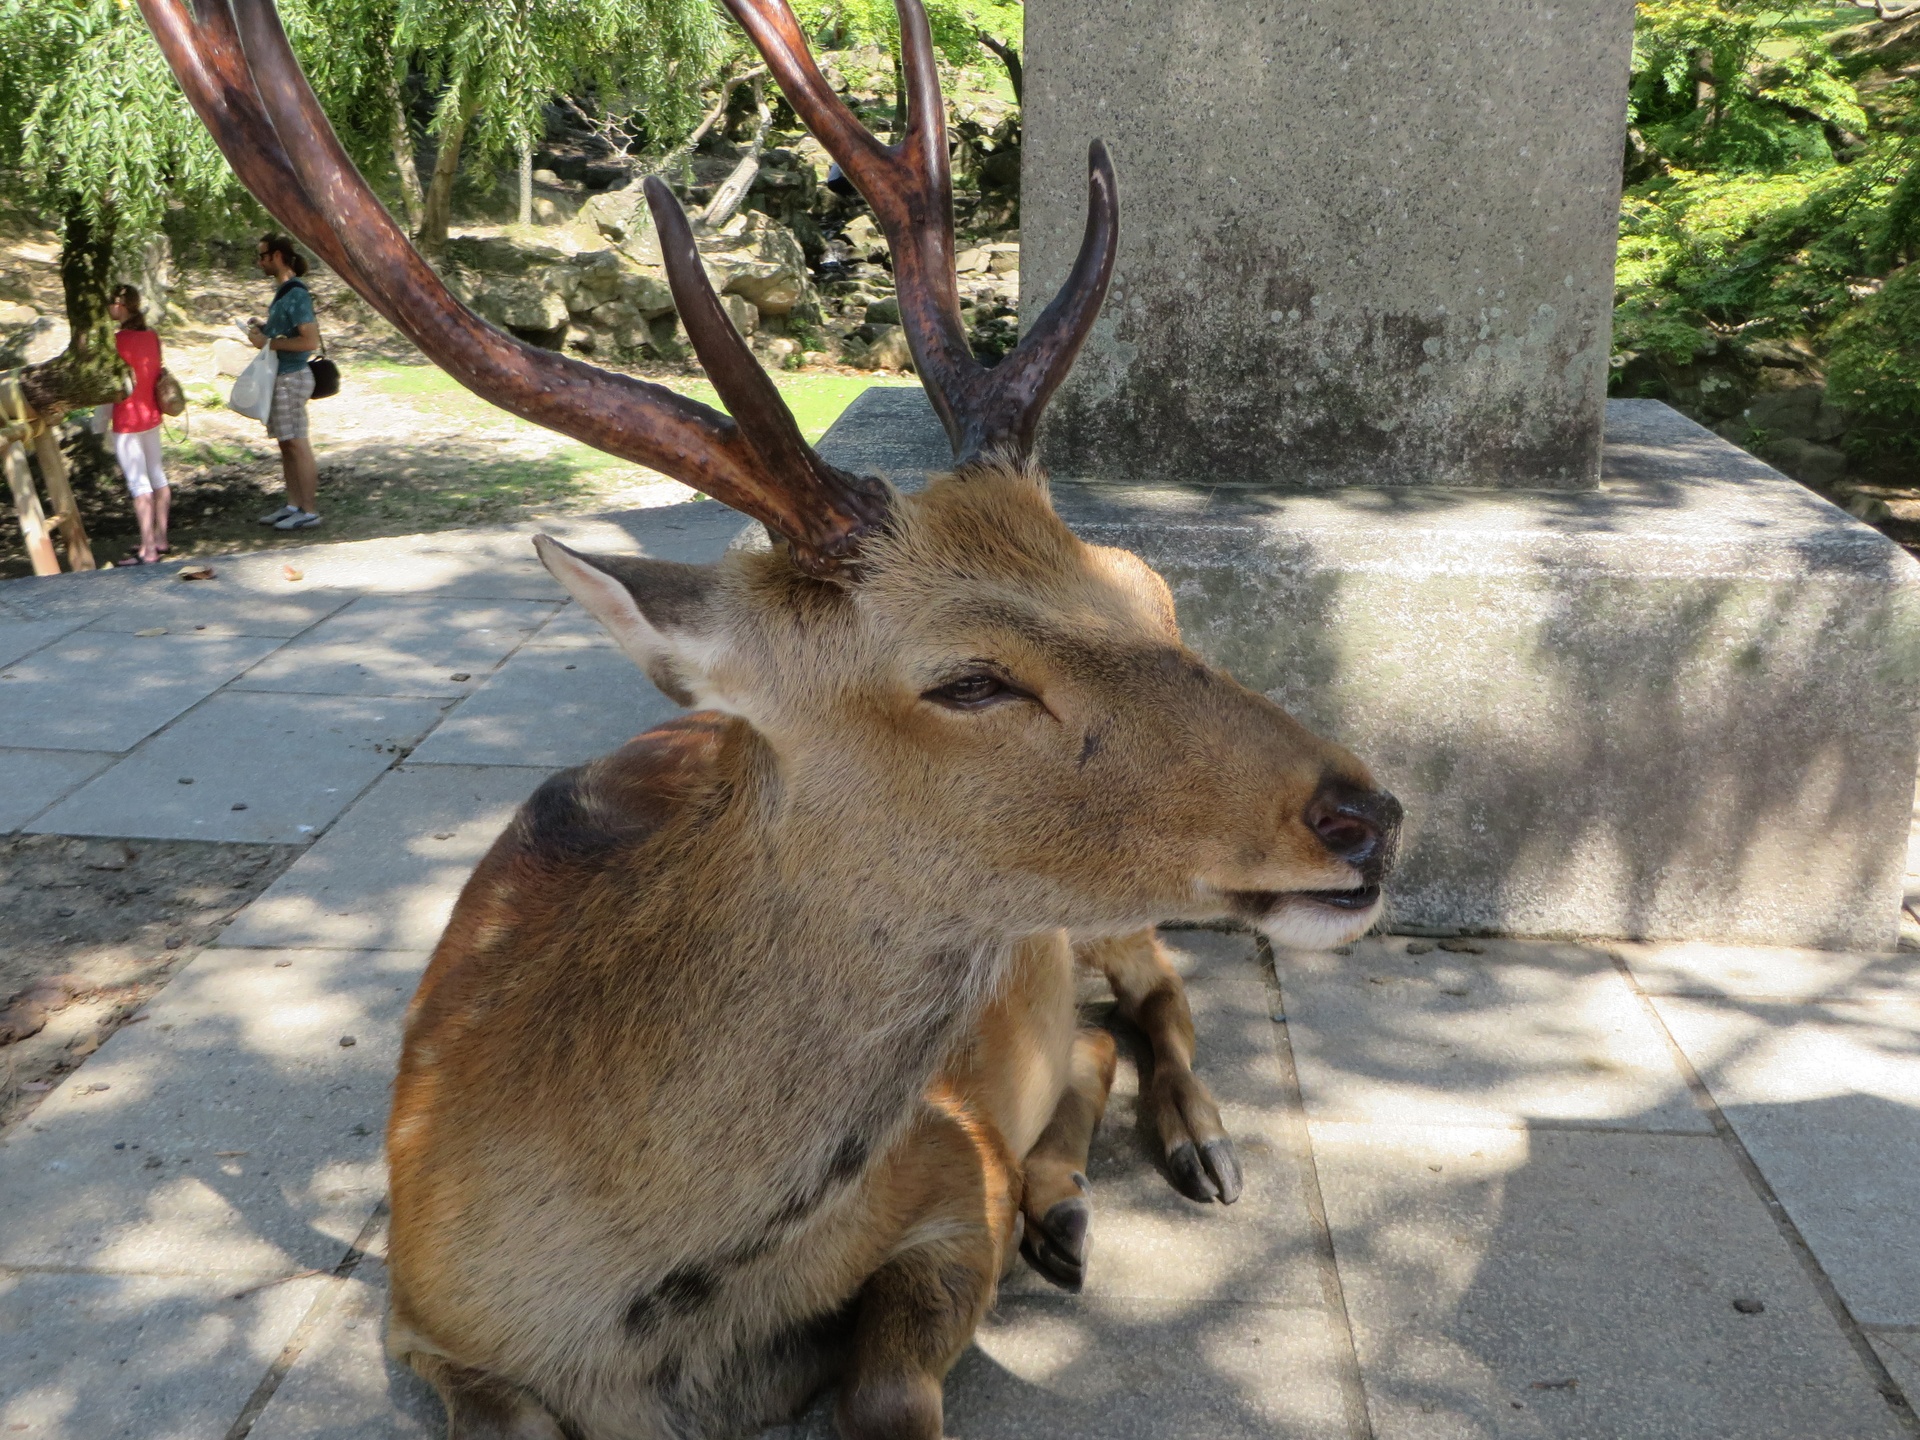 A friendly deer with large antlers laying down in Nara